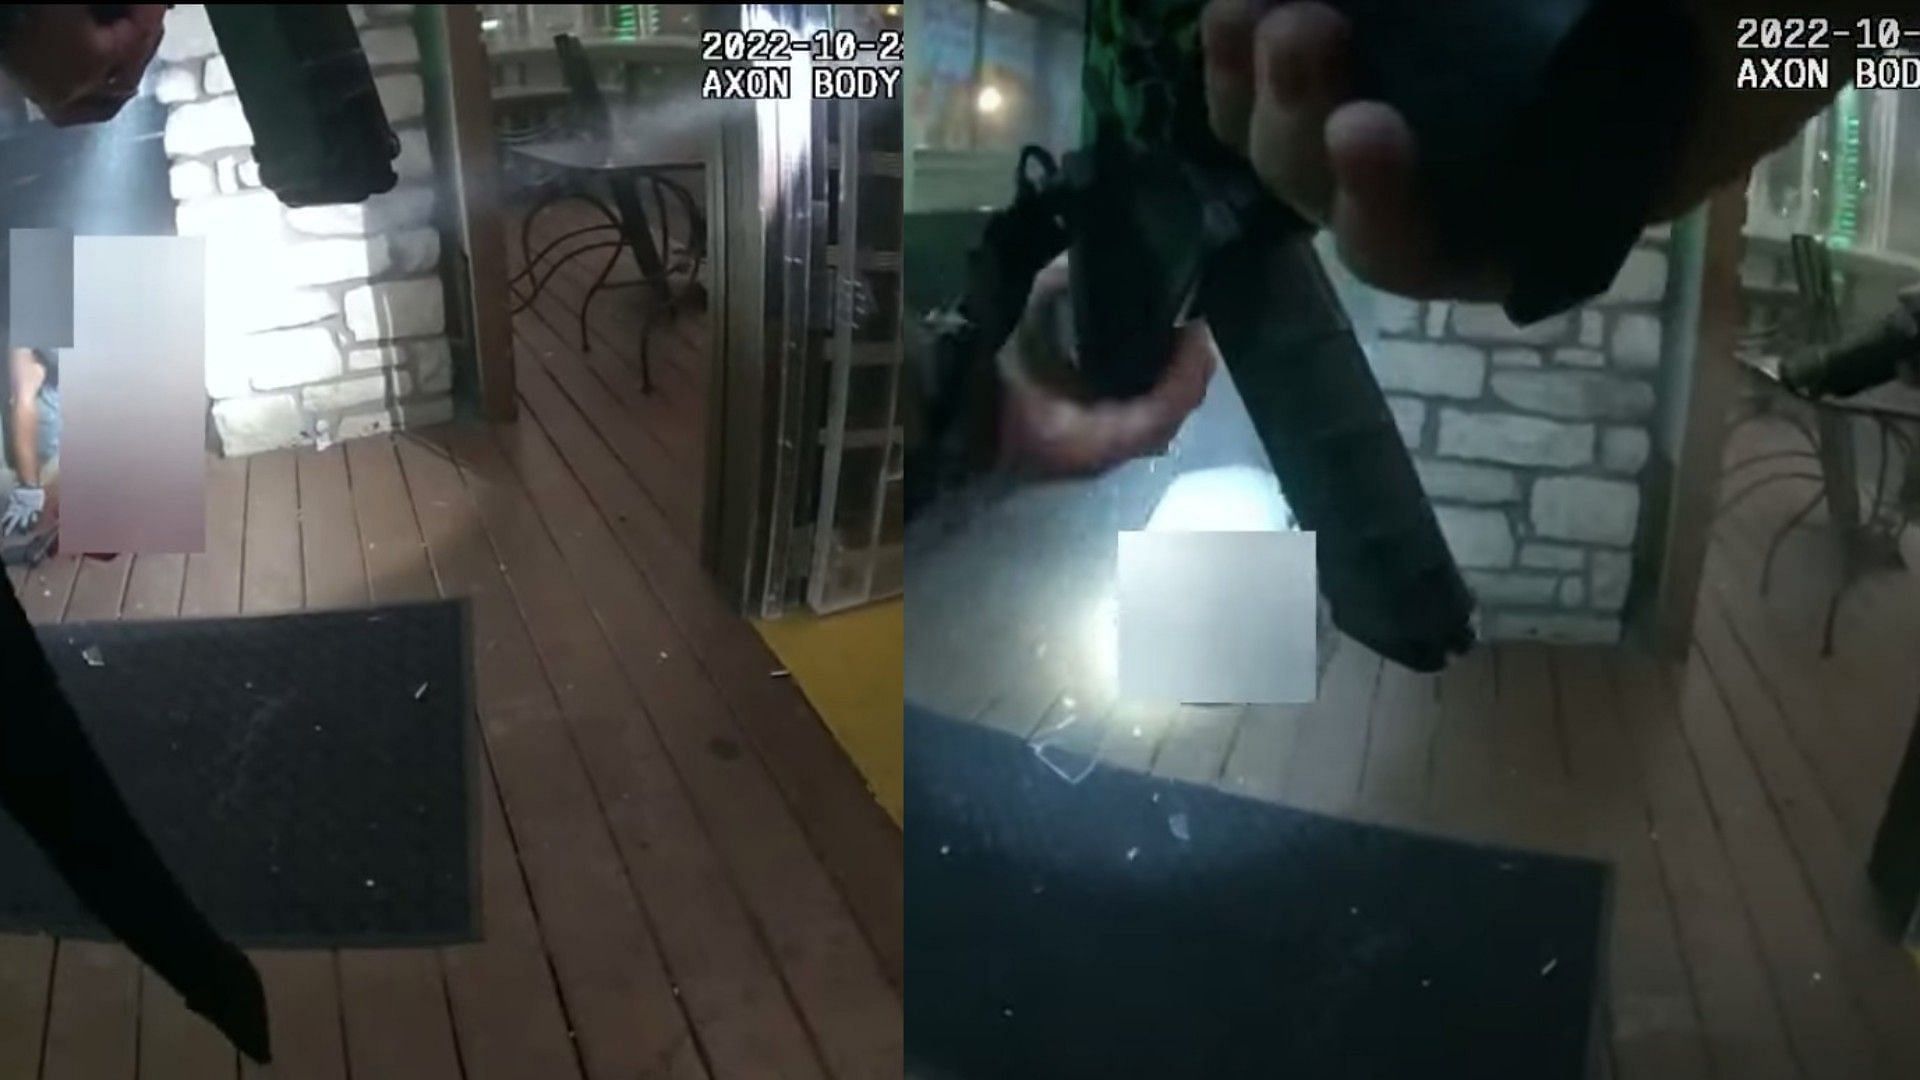 Austin Police Department released body-cam footage from an officer-involved shooting (Image via APD/YouTube))